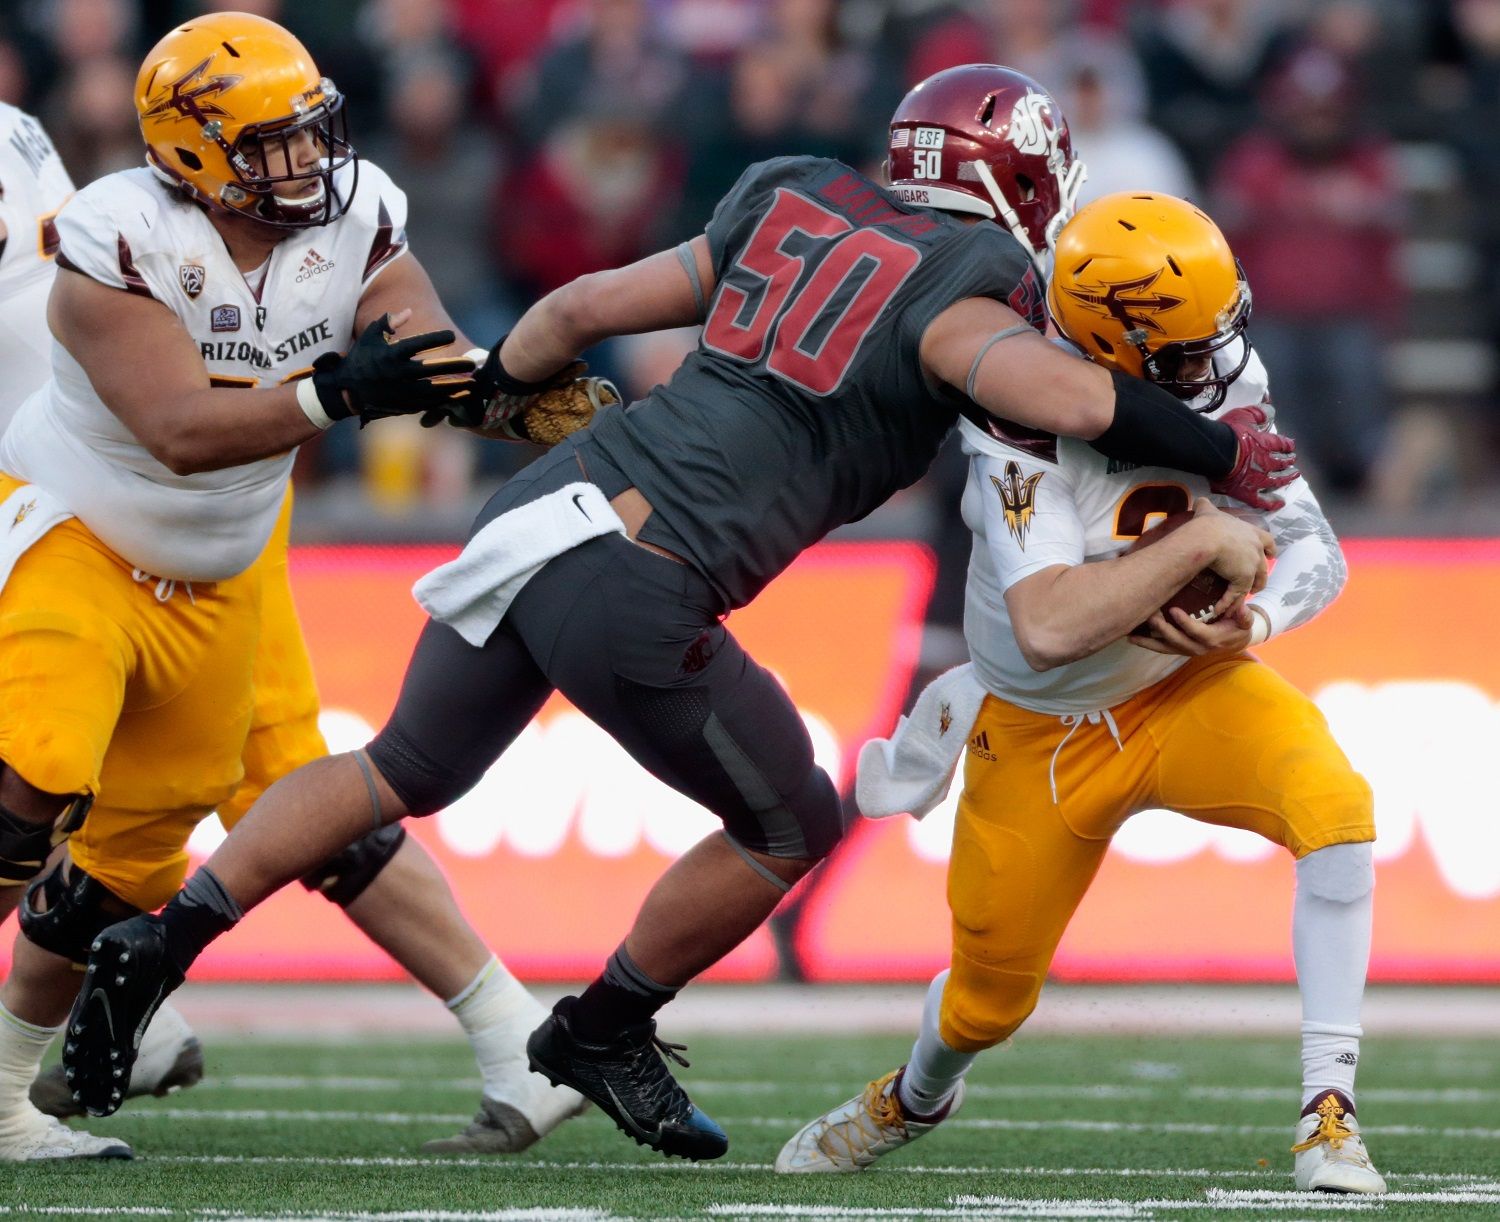 PULLMAN, WA - NOVEMBER 07:  Mike Bercovici #2 of the Arizona State Sun Devils is sacked by Hercules Mata'afa #50 of the Washington State Cougars in the second half at Martin Stadium on November 7, 2015 in Pullman, Washington.  Washington State defeated Arizona State 38-24.  (Photo by William Mancebo/Getty Images)